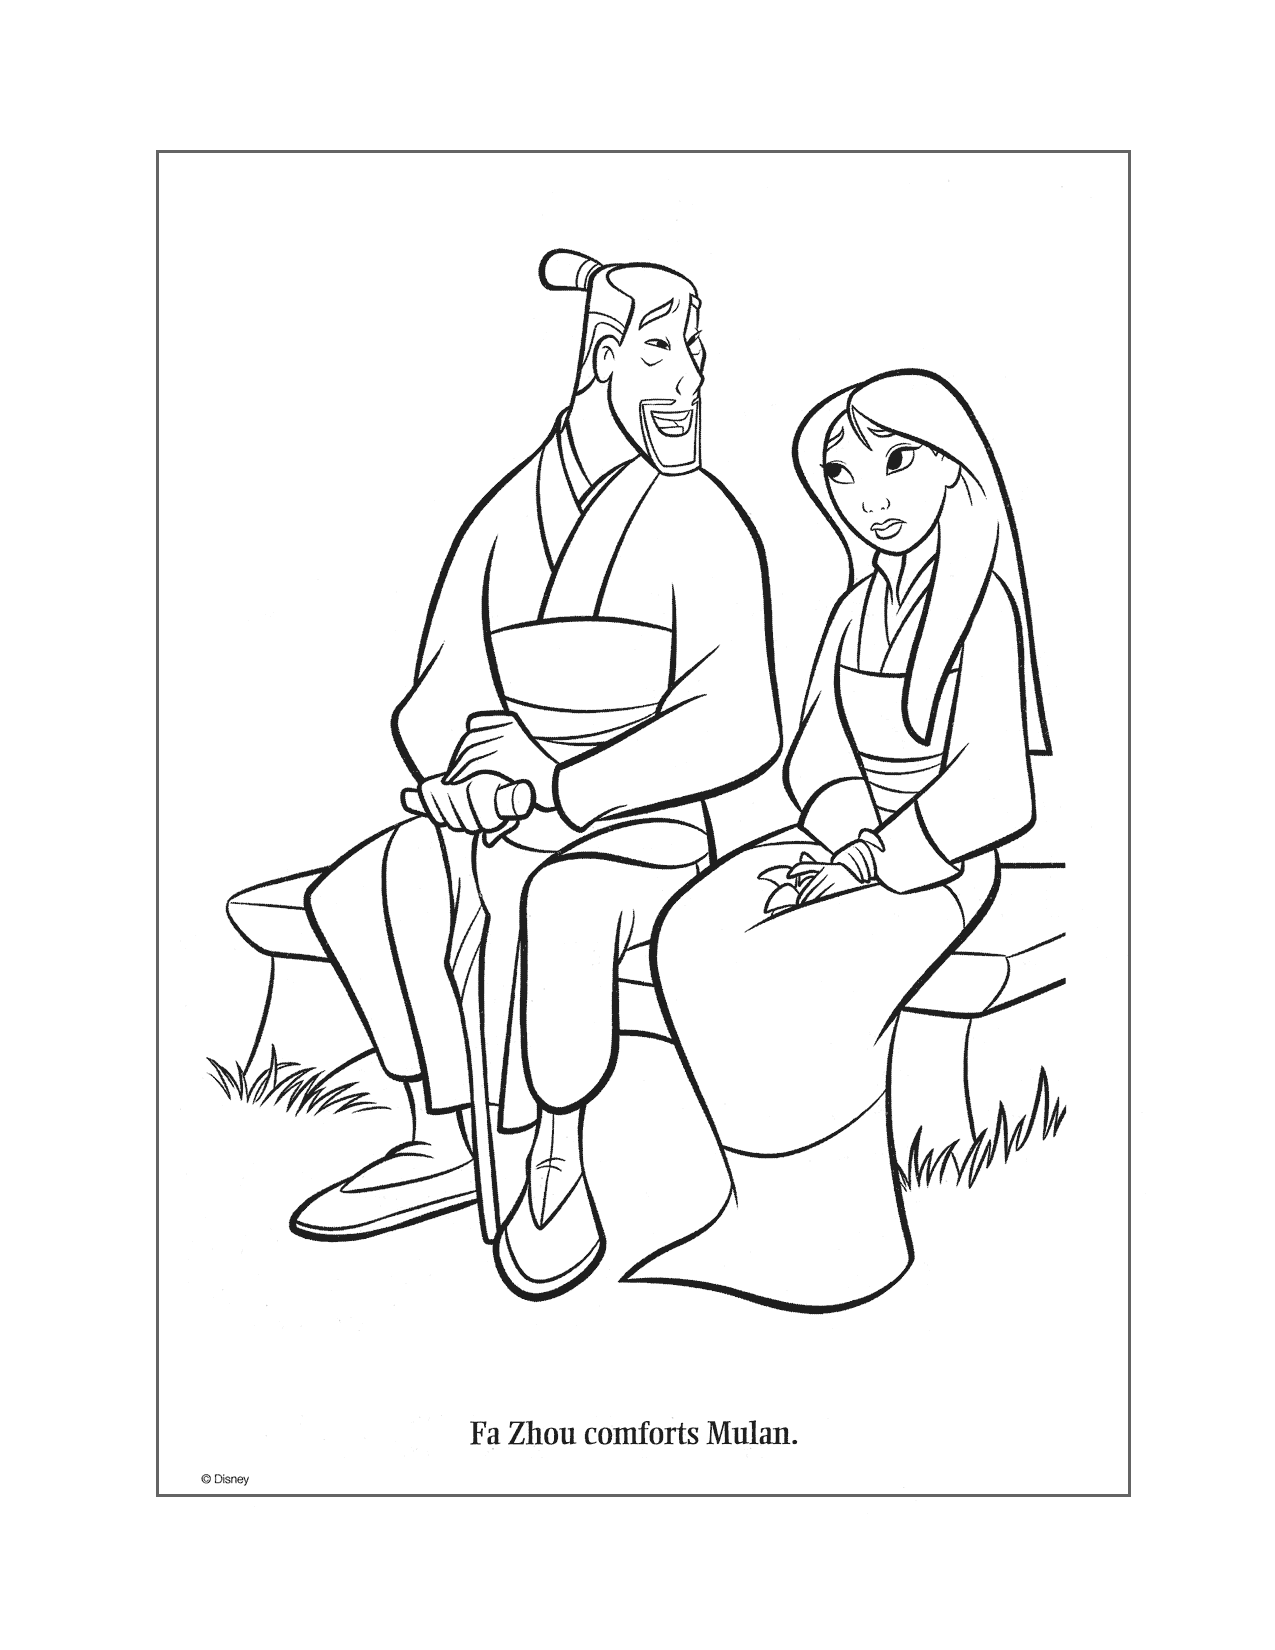 Mulan And Her Father Coloring Page